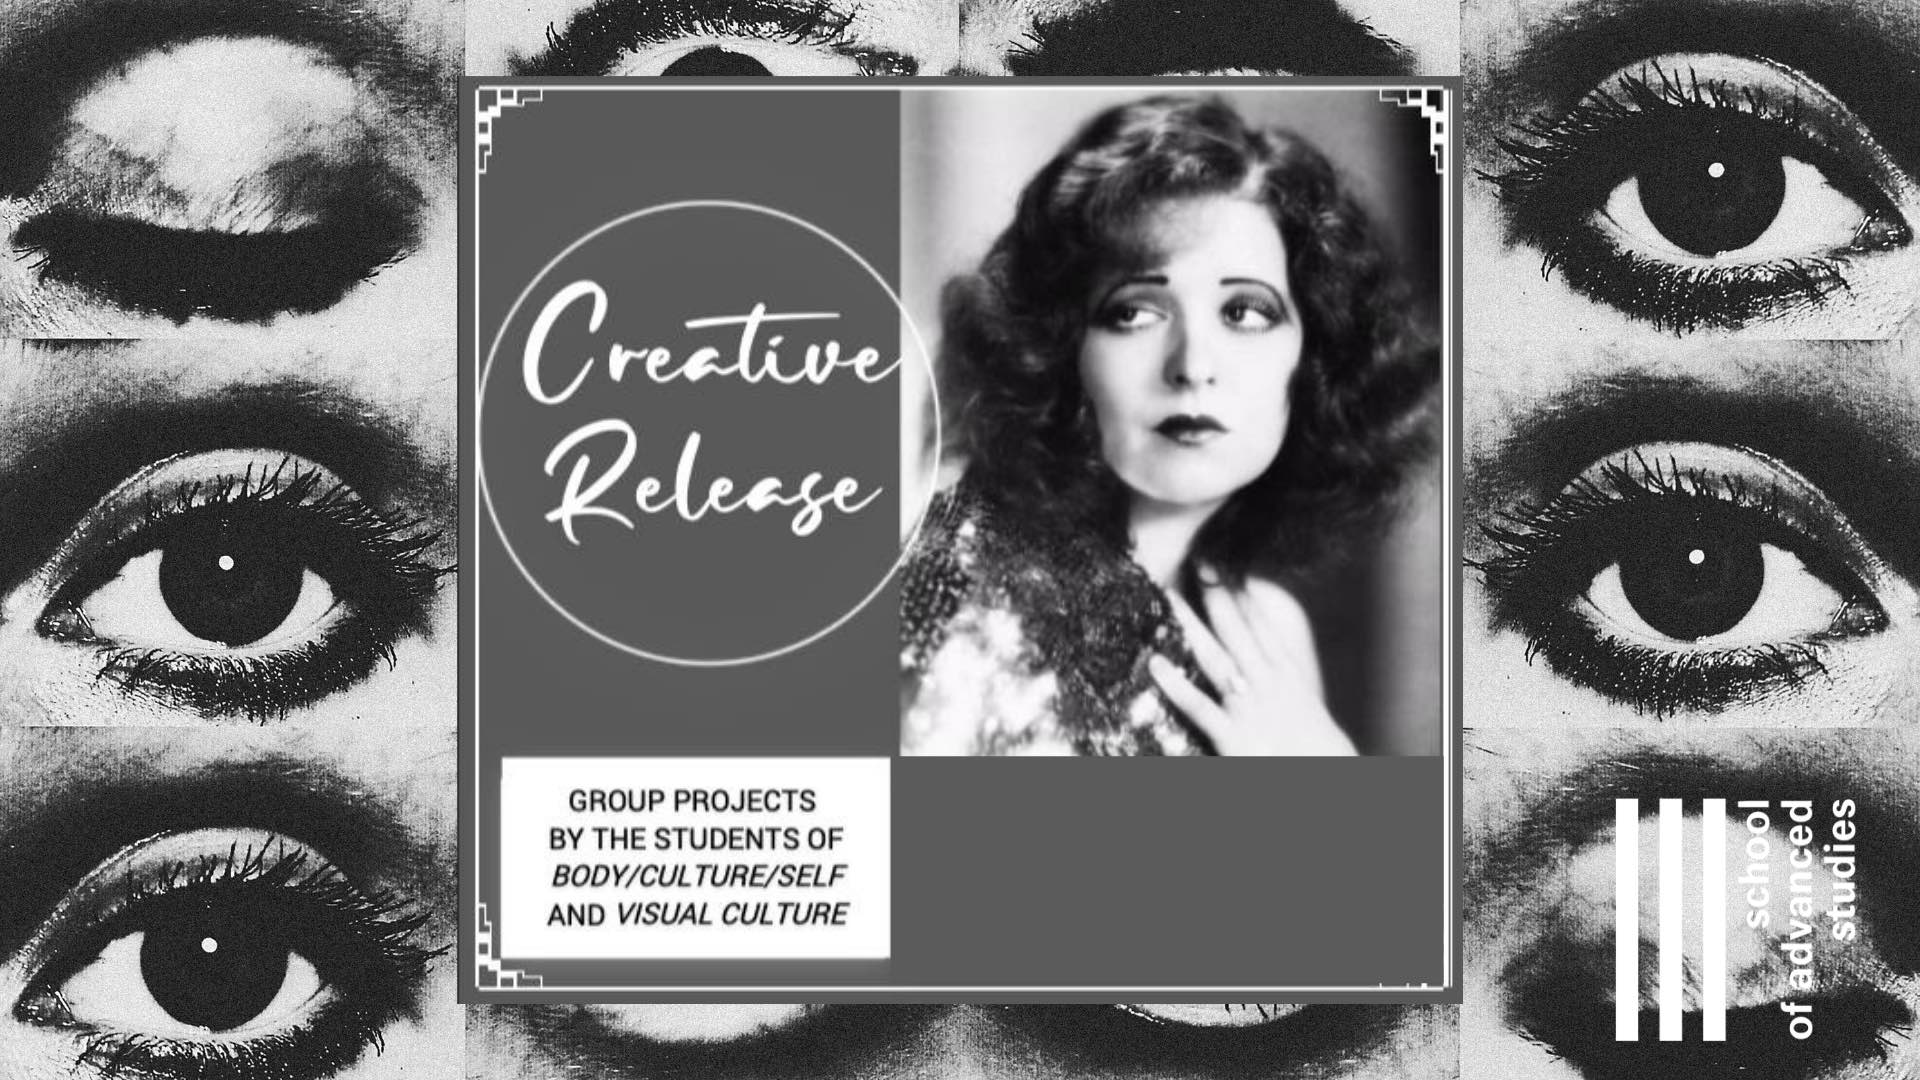 STUDENT CREATIVE RELEASE: CREATIVE SELF-REALIZATION & REDEFINING REALITY